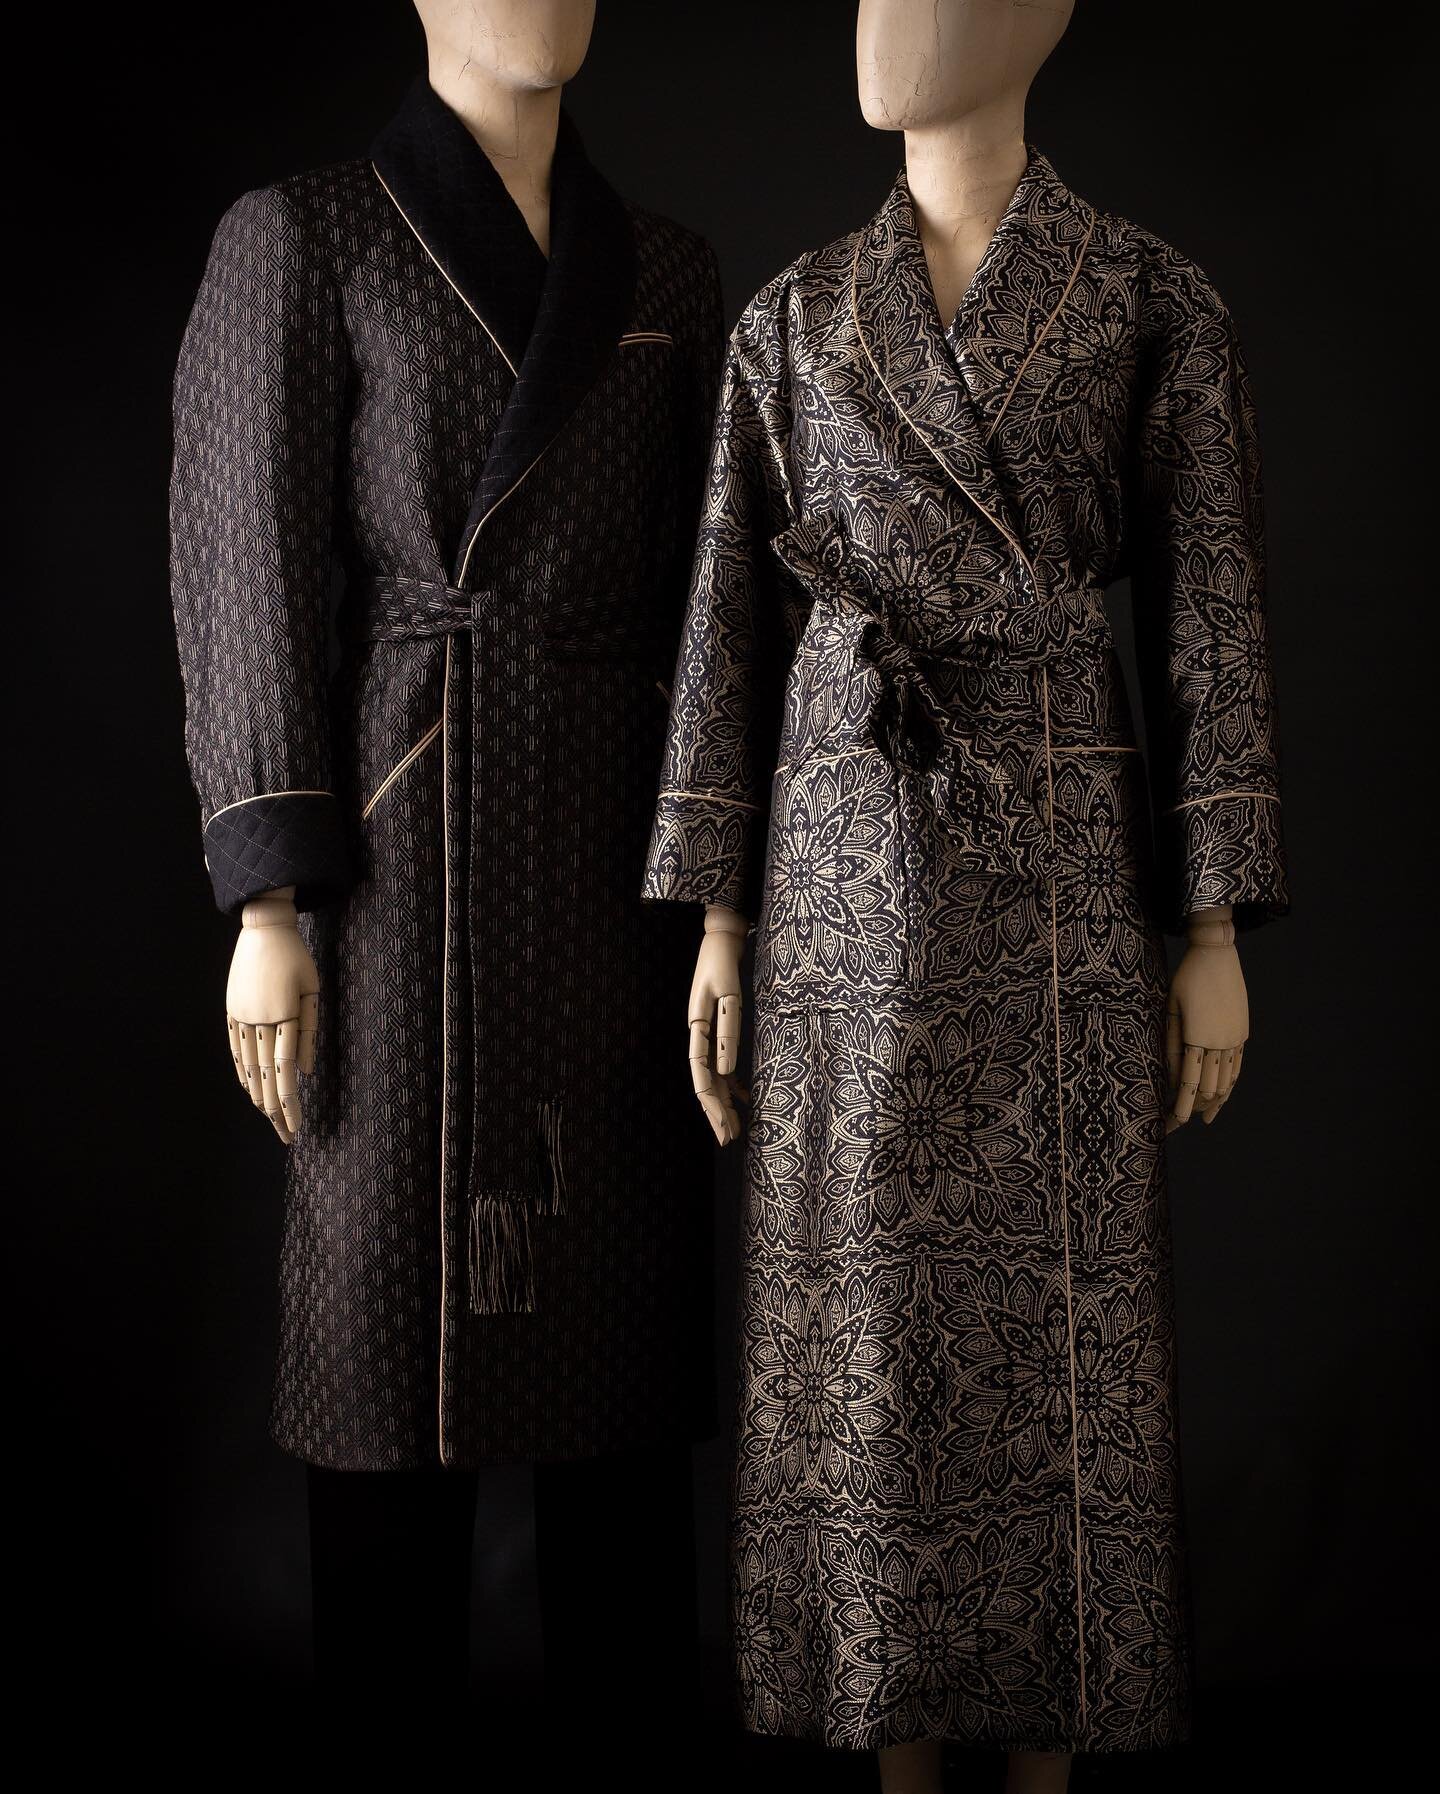 A pair of exquisite bespoke garments for a special client earlier this year. Swipe to see who we made these for&hellip;

Both of these designs will be made available on our website soon. Contact us directly to express your interest.

#DH22 #DanielHan